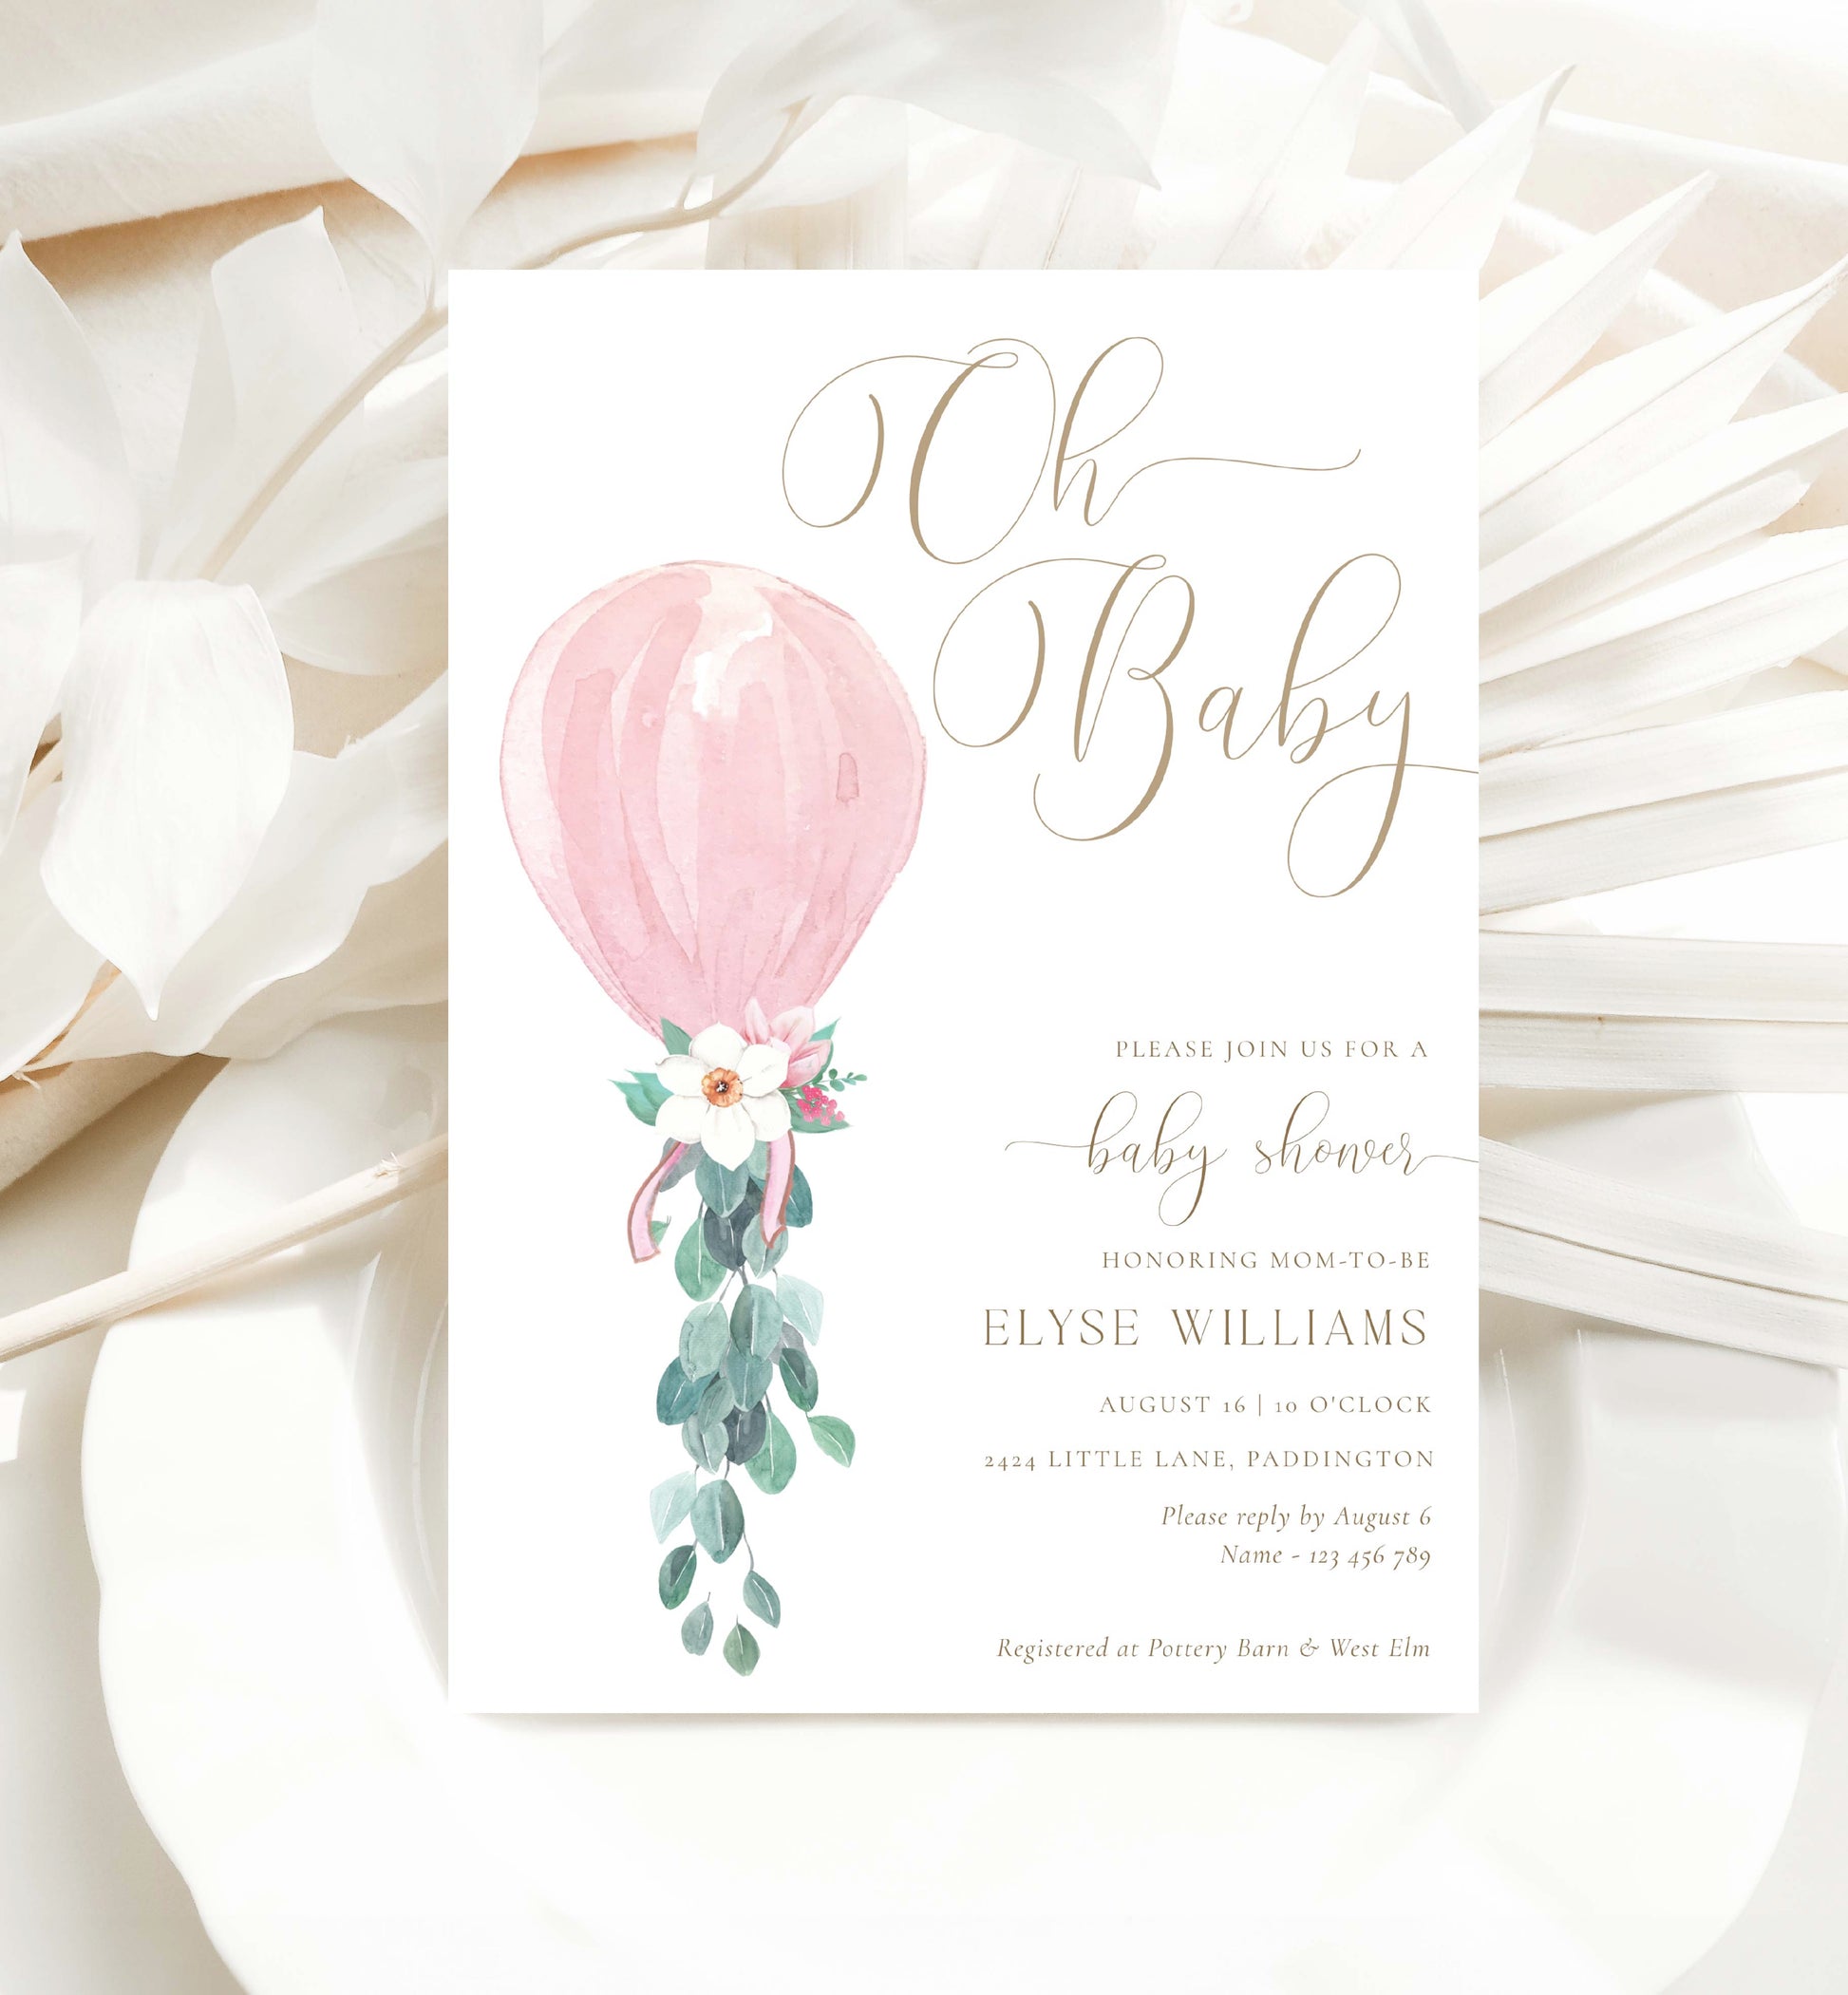 Oh Baby Baby Shower Invitation, Book Request, Raffle Ticket, Printable Pink Balloon Baby Shower Invite, Girl Baby Shower Invite, Darlington